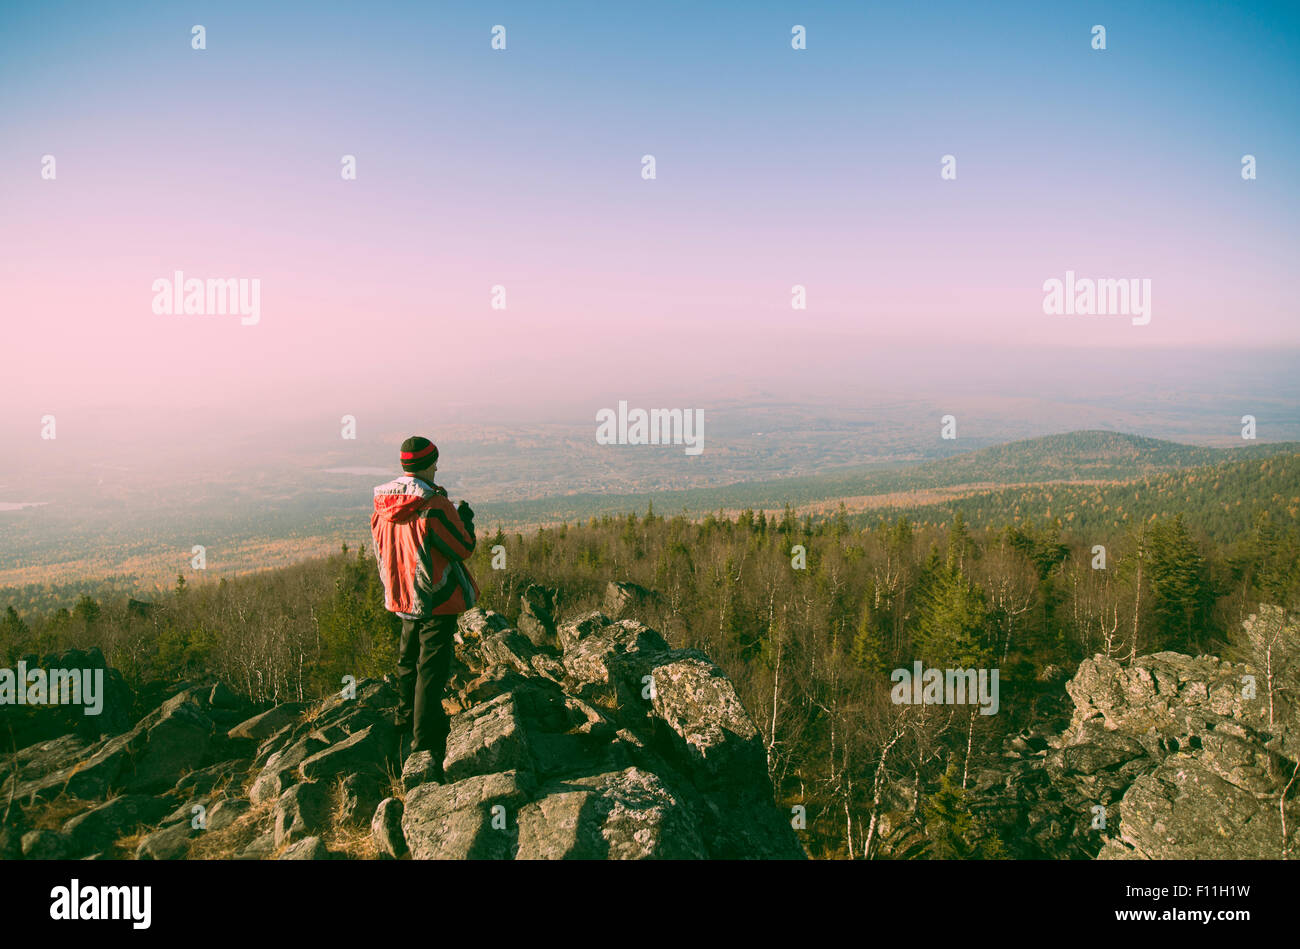 Caucasian hiker admiring view from remote rock formation Stock Photo